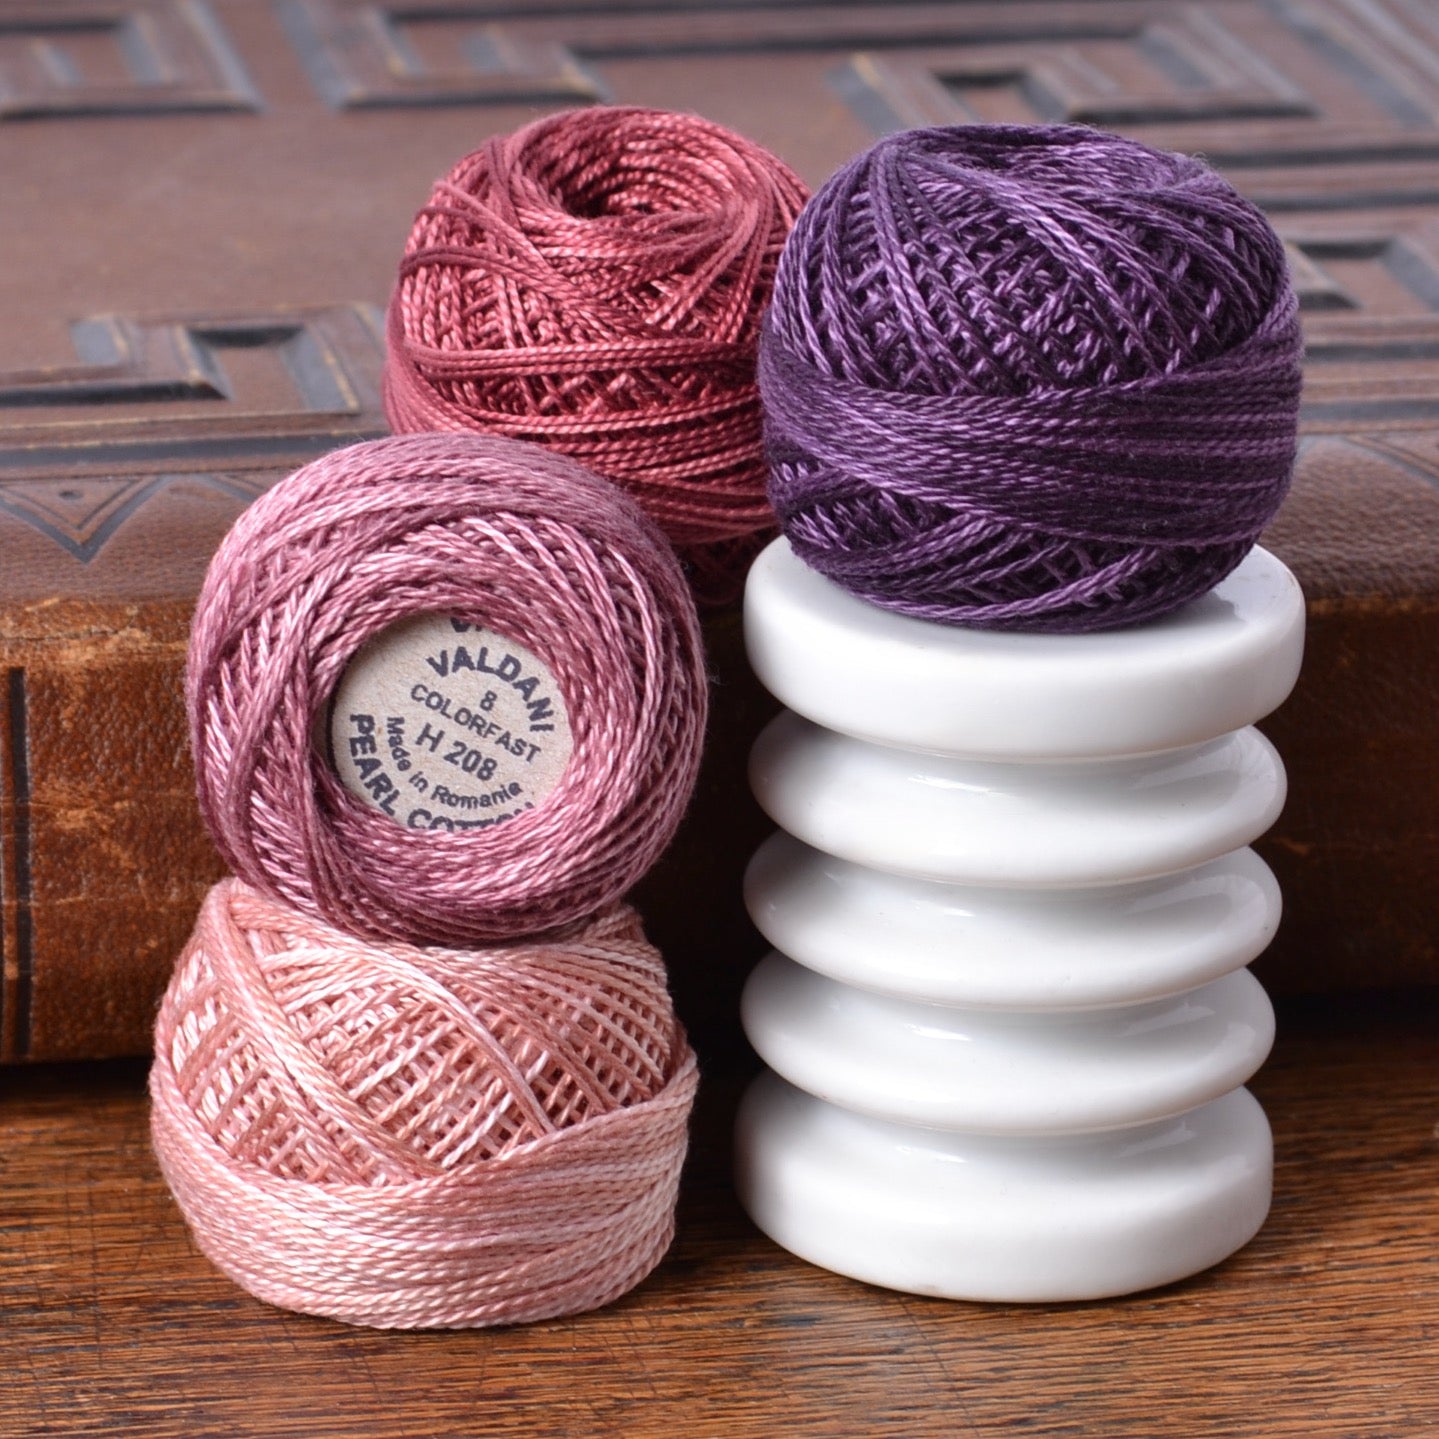 Pinks and purple perle cotton thread